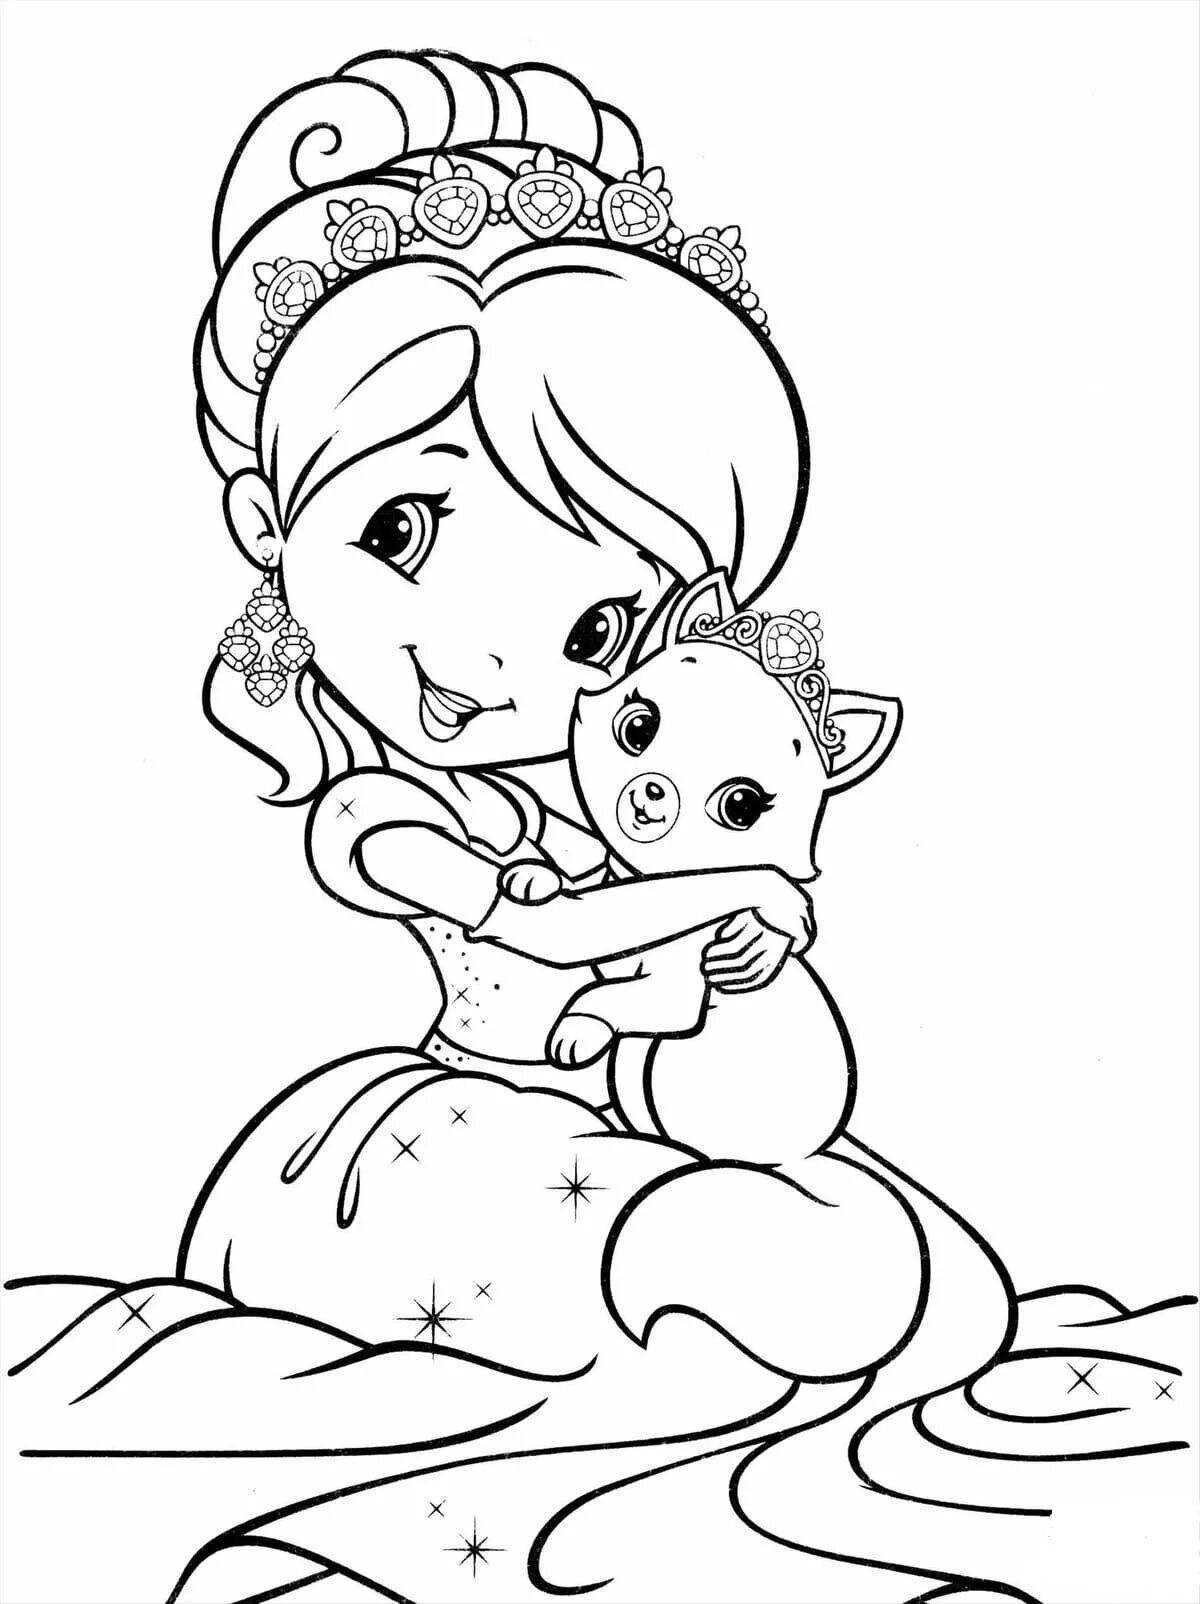 Gorgeous princess coloring pages for 6 year old girls